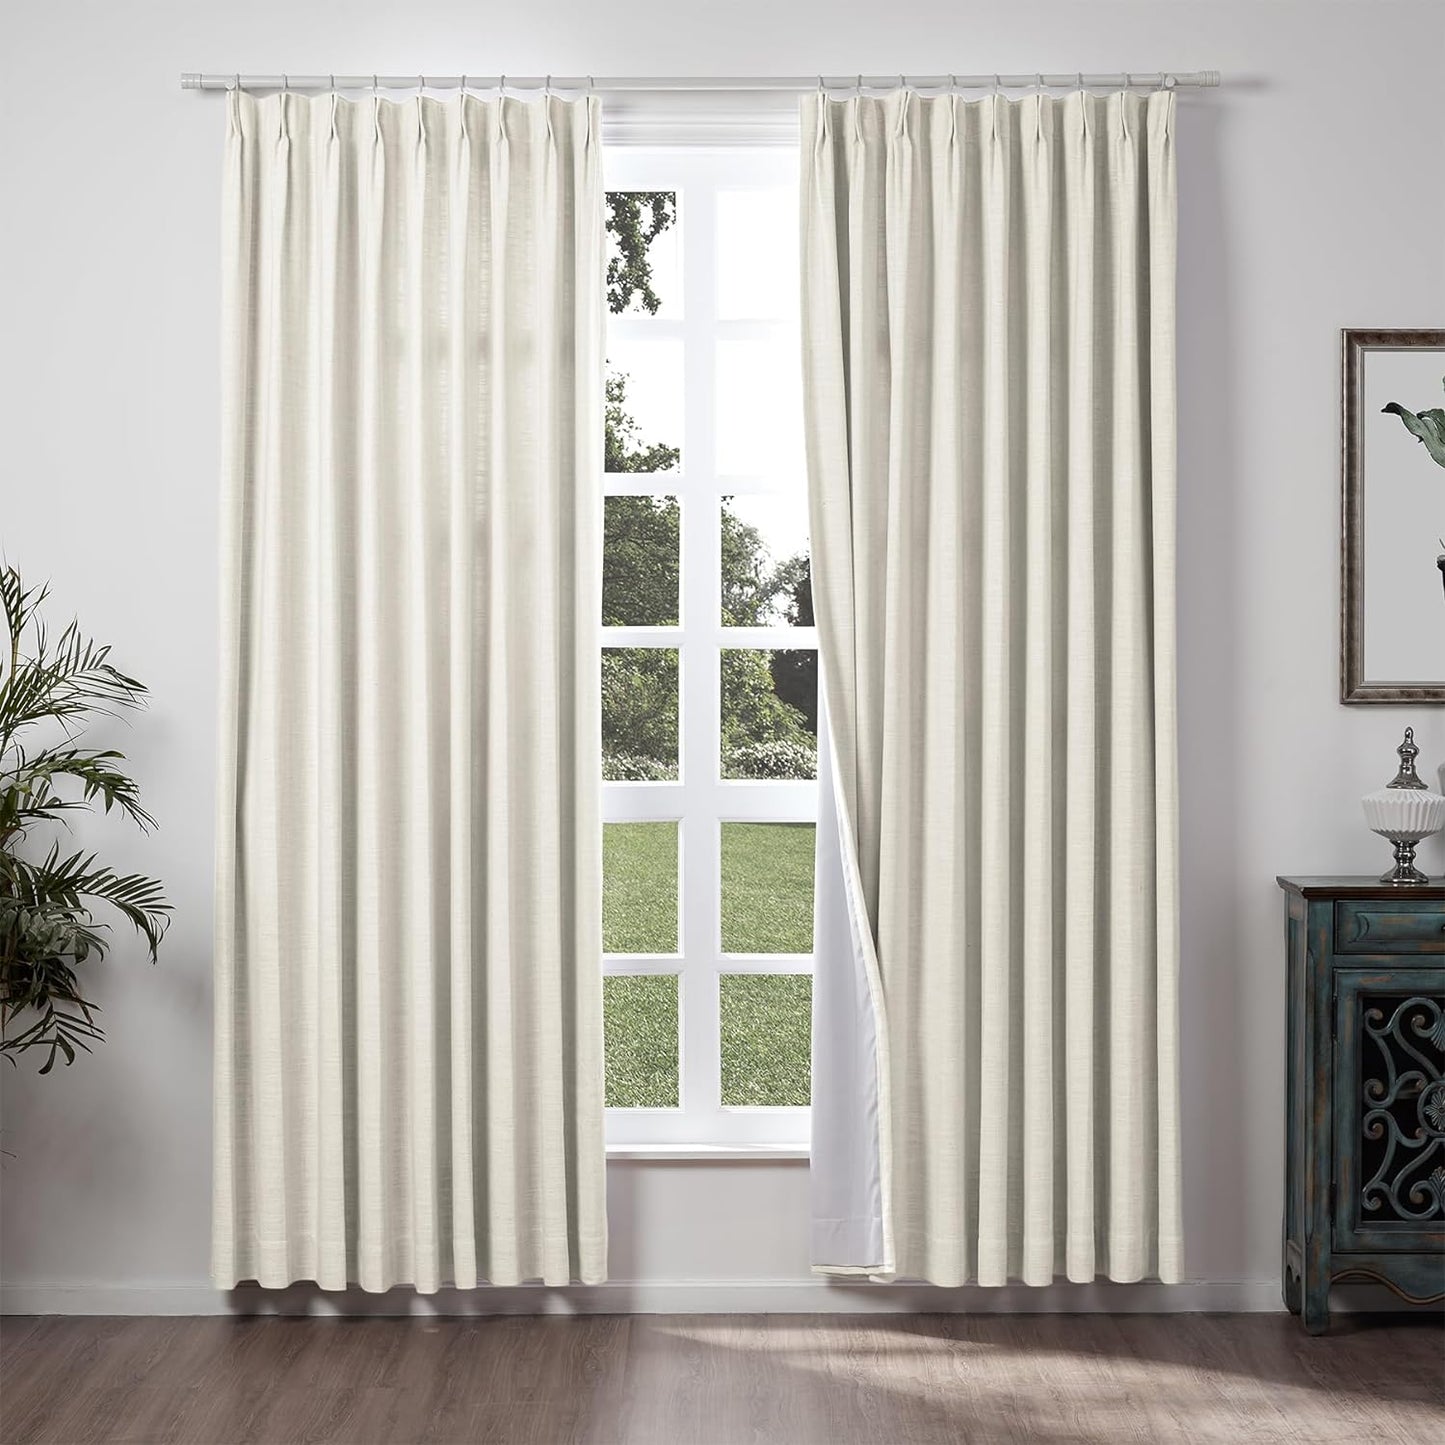 Chadmade 50" W X 63" L Polyester Linen Drape with Blackout Lining Pinch Pleat Curtain for Sliding Door Patio Door Living Room Bedroom, (1 Panel) Sand Beige Tallis Collection  ChadMade Ivory White (2) 72Wx84L 